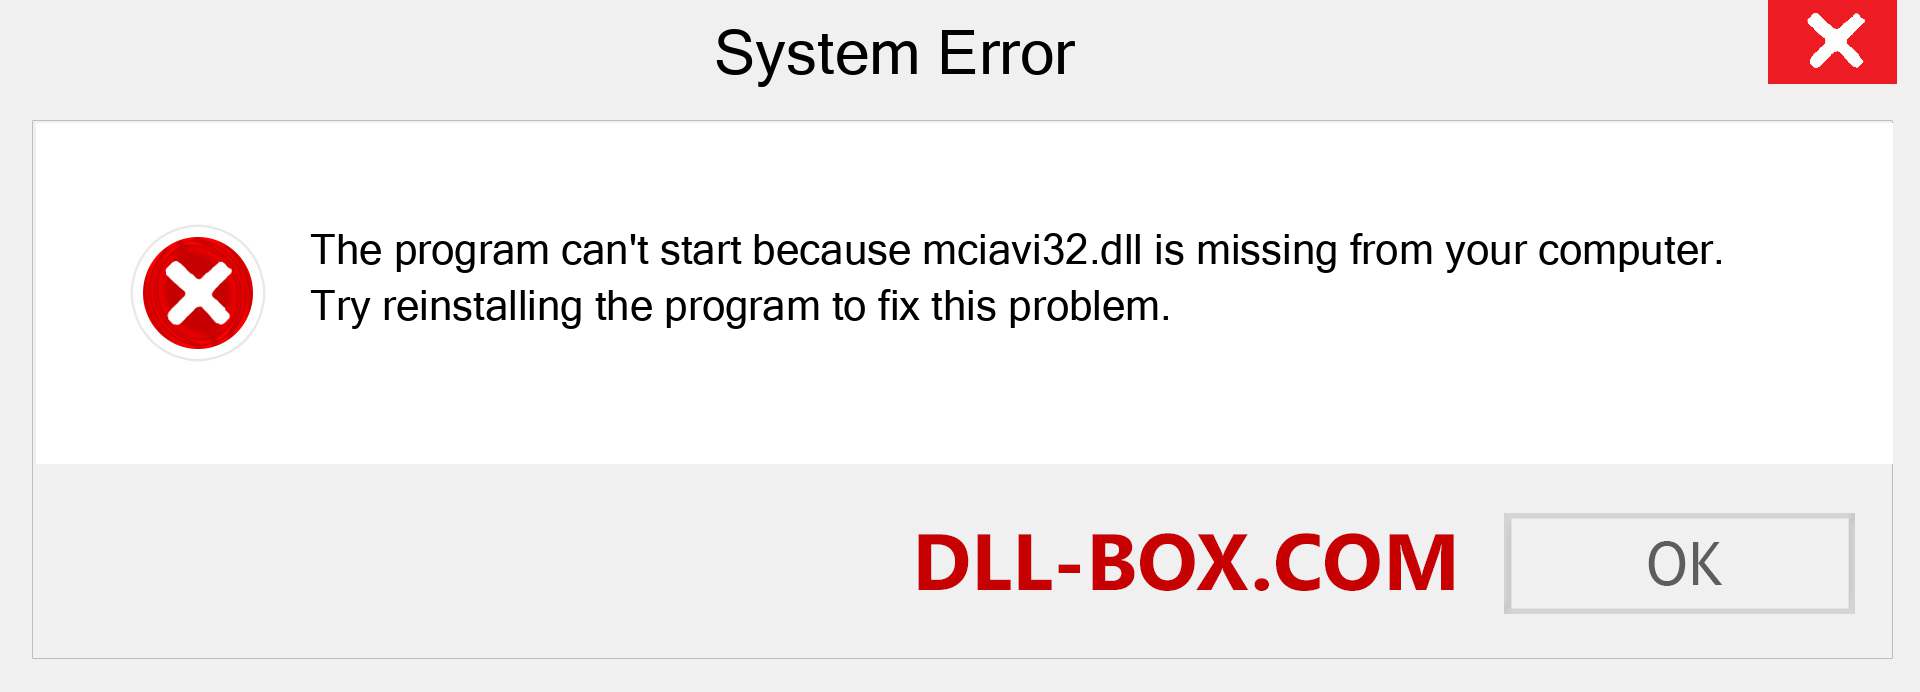  mciavi32.dll file is missing?. Download for Windows 7, 8, 10 - Fix  mciavi32 dll Missing Error on Windows, photos, images